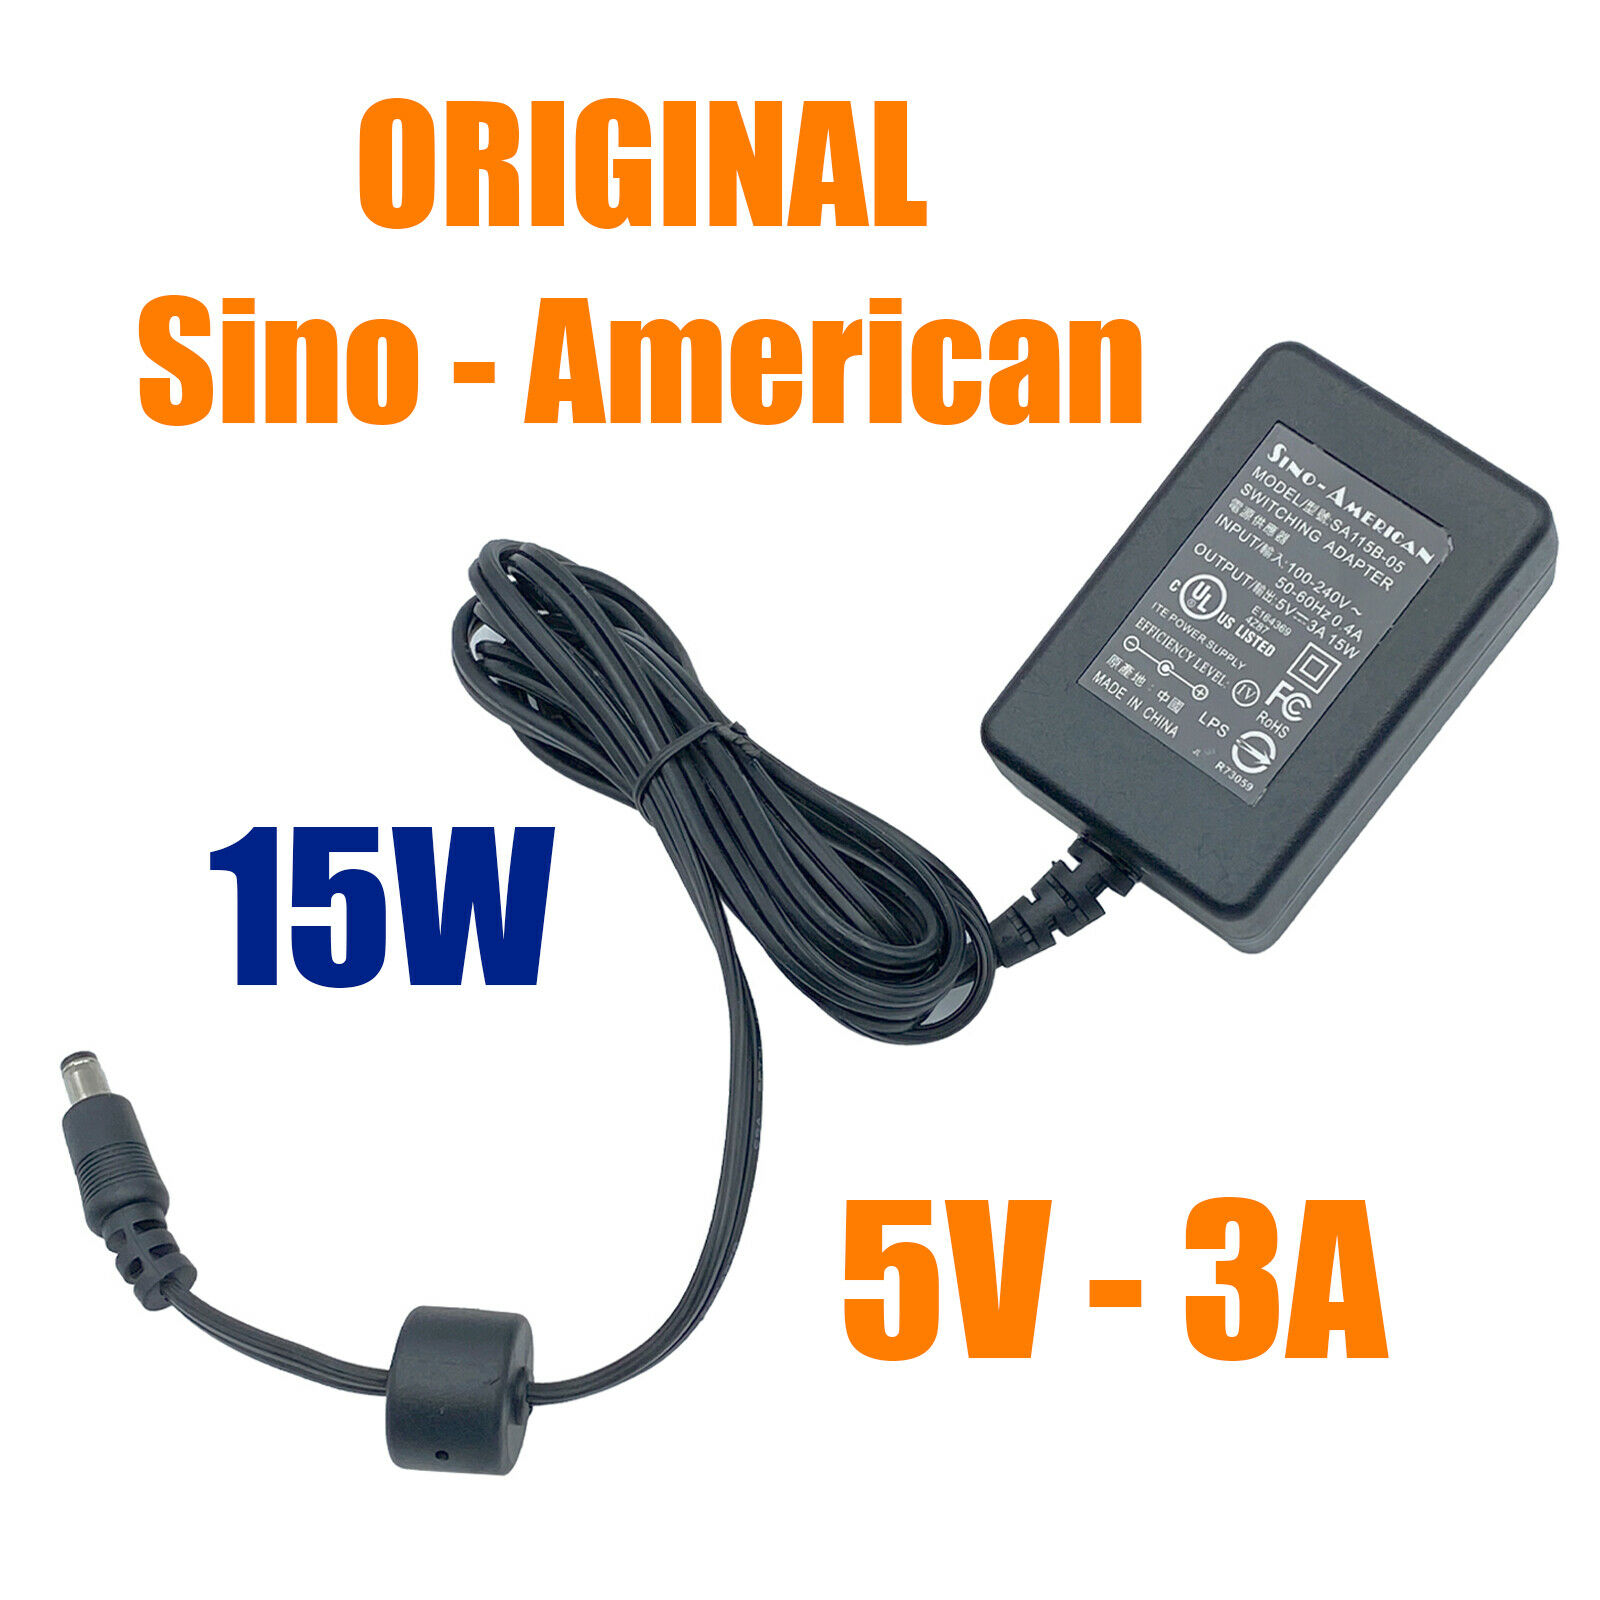 Genuine Sino-American SA115B-05 Switching Adapter 5V 3A 15W Power Supply Product Type: Transformer Type: AC/AC Adapter - Click Image to Close